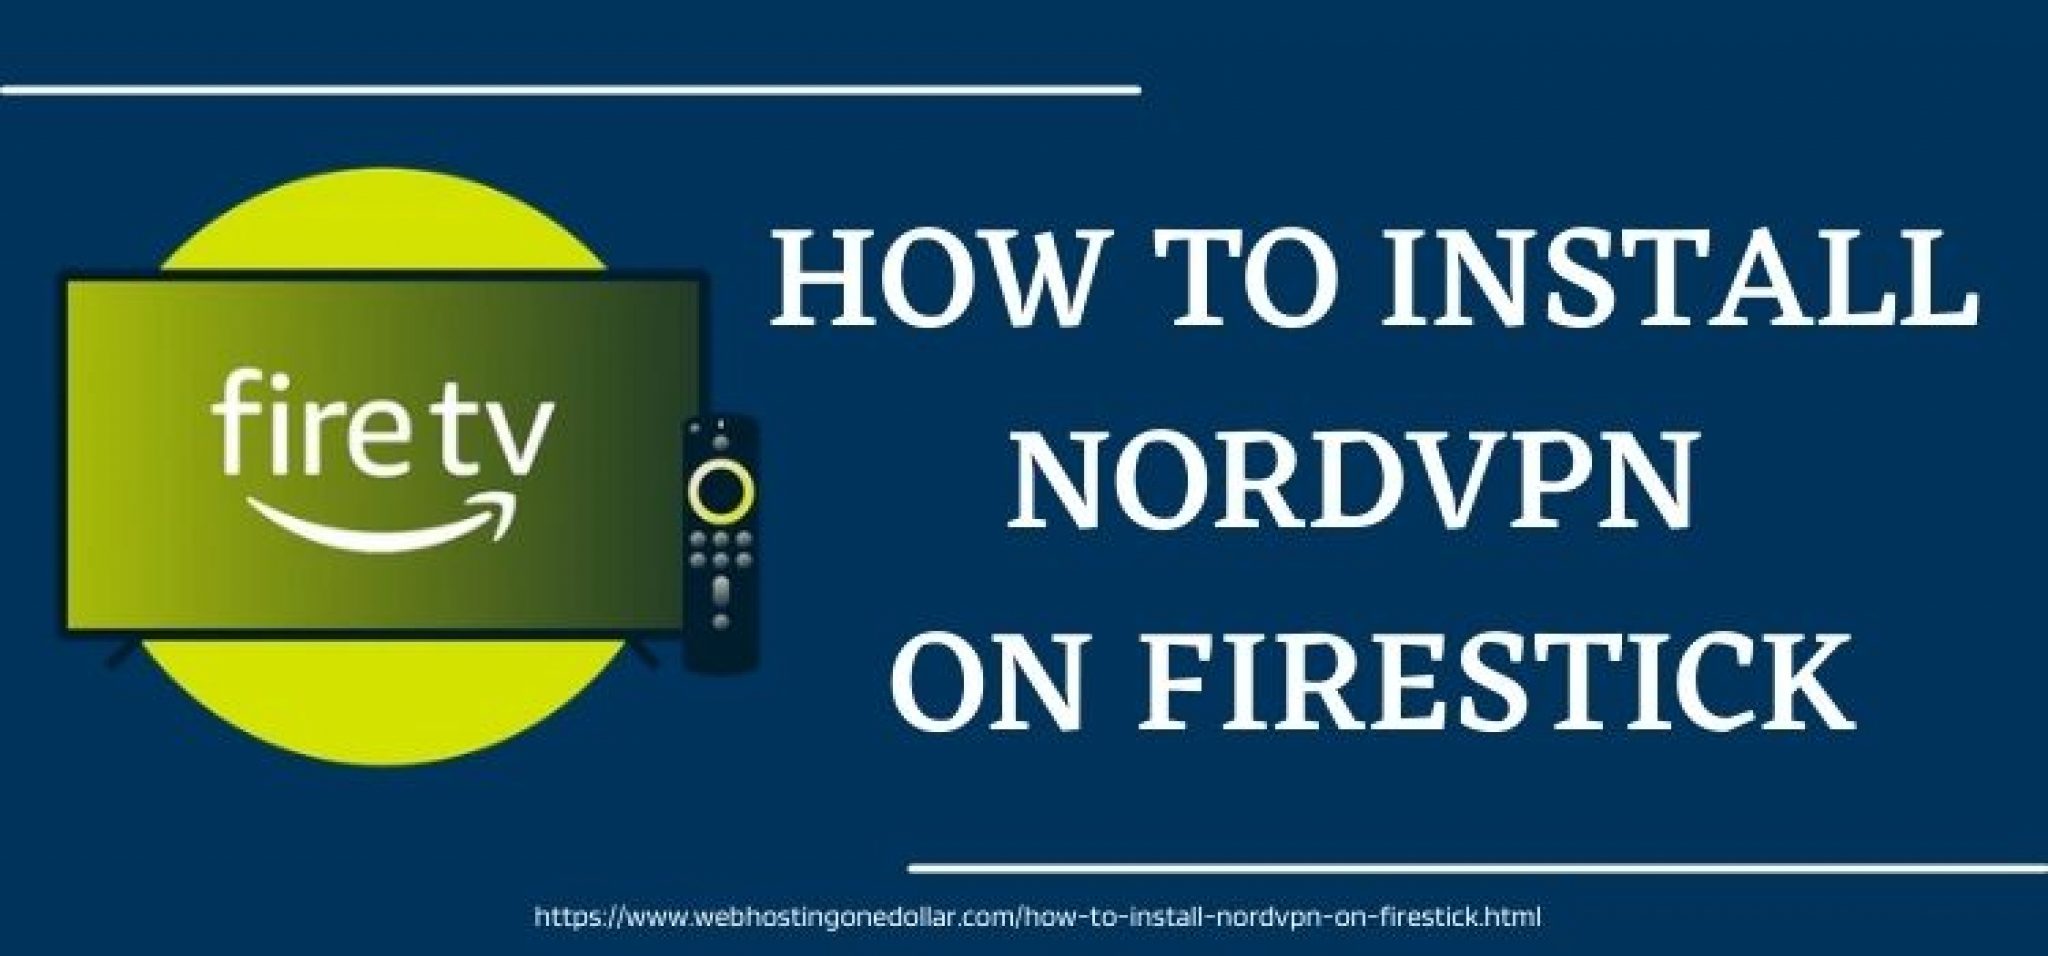 how to download nordvpn on amazon firestick